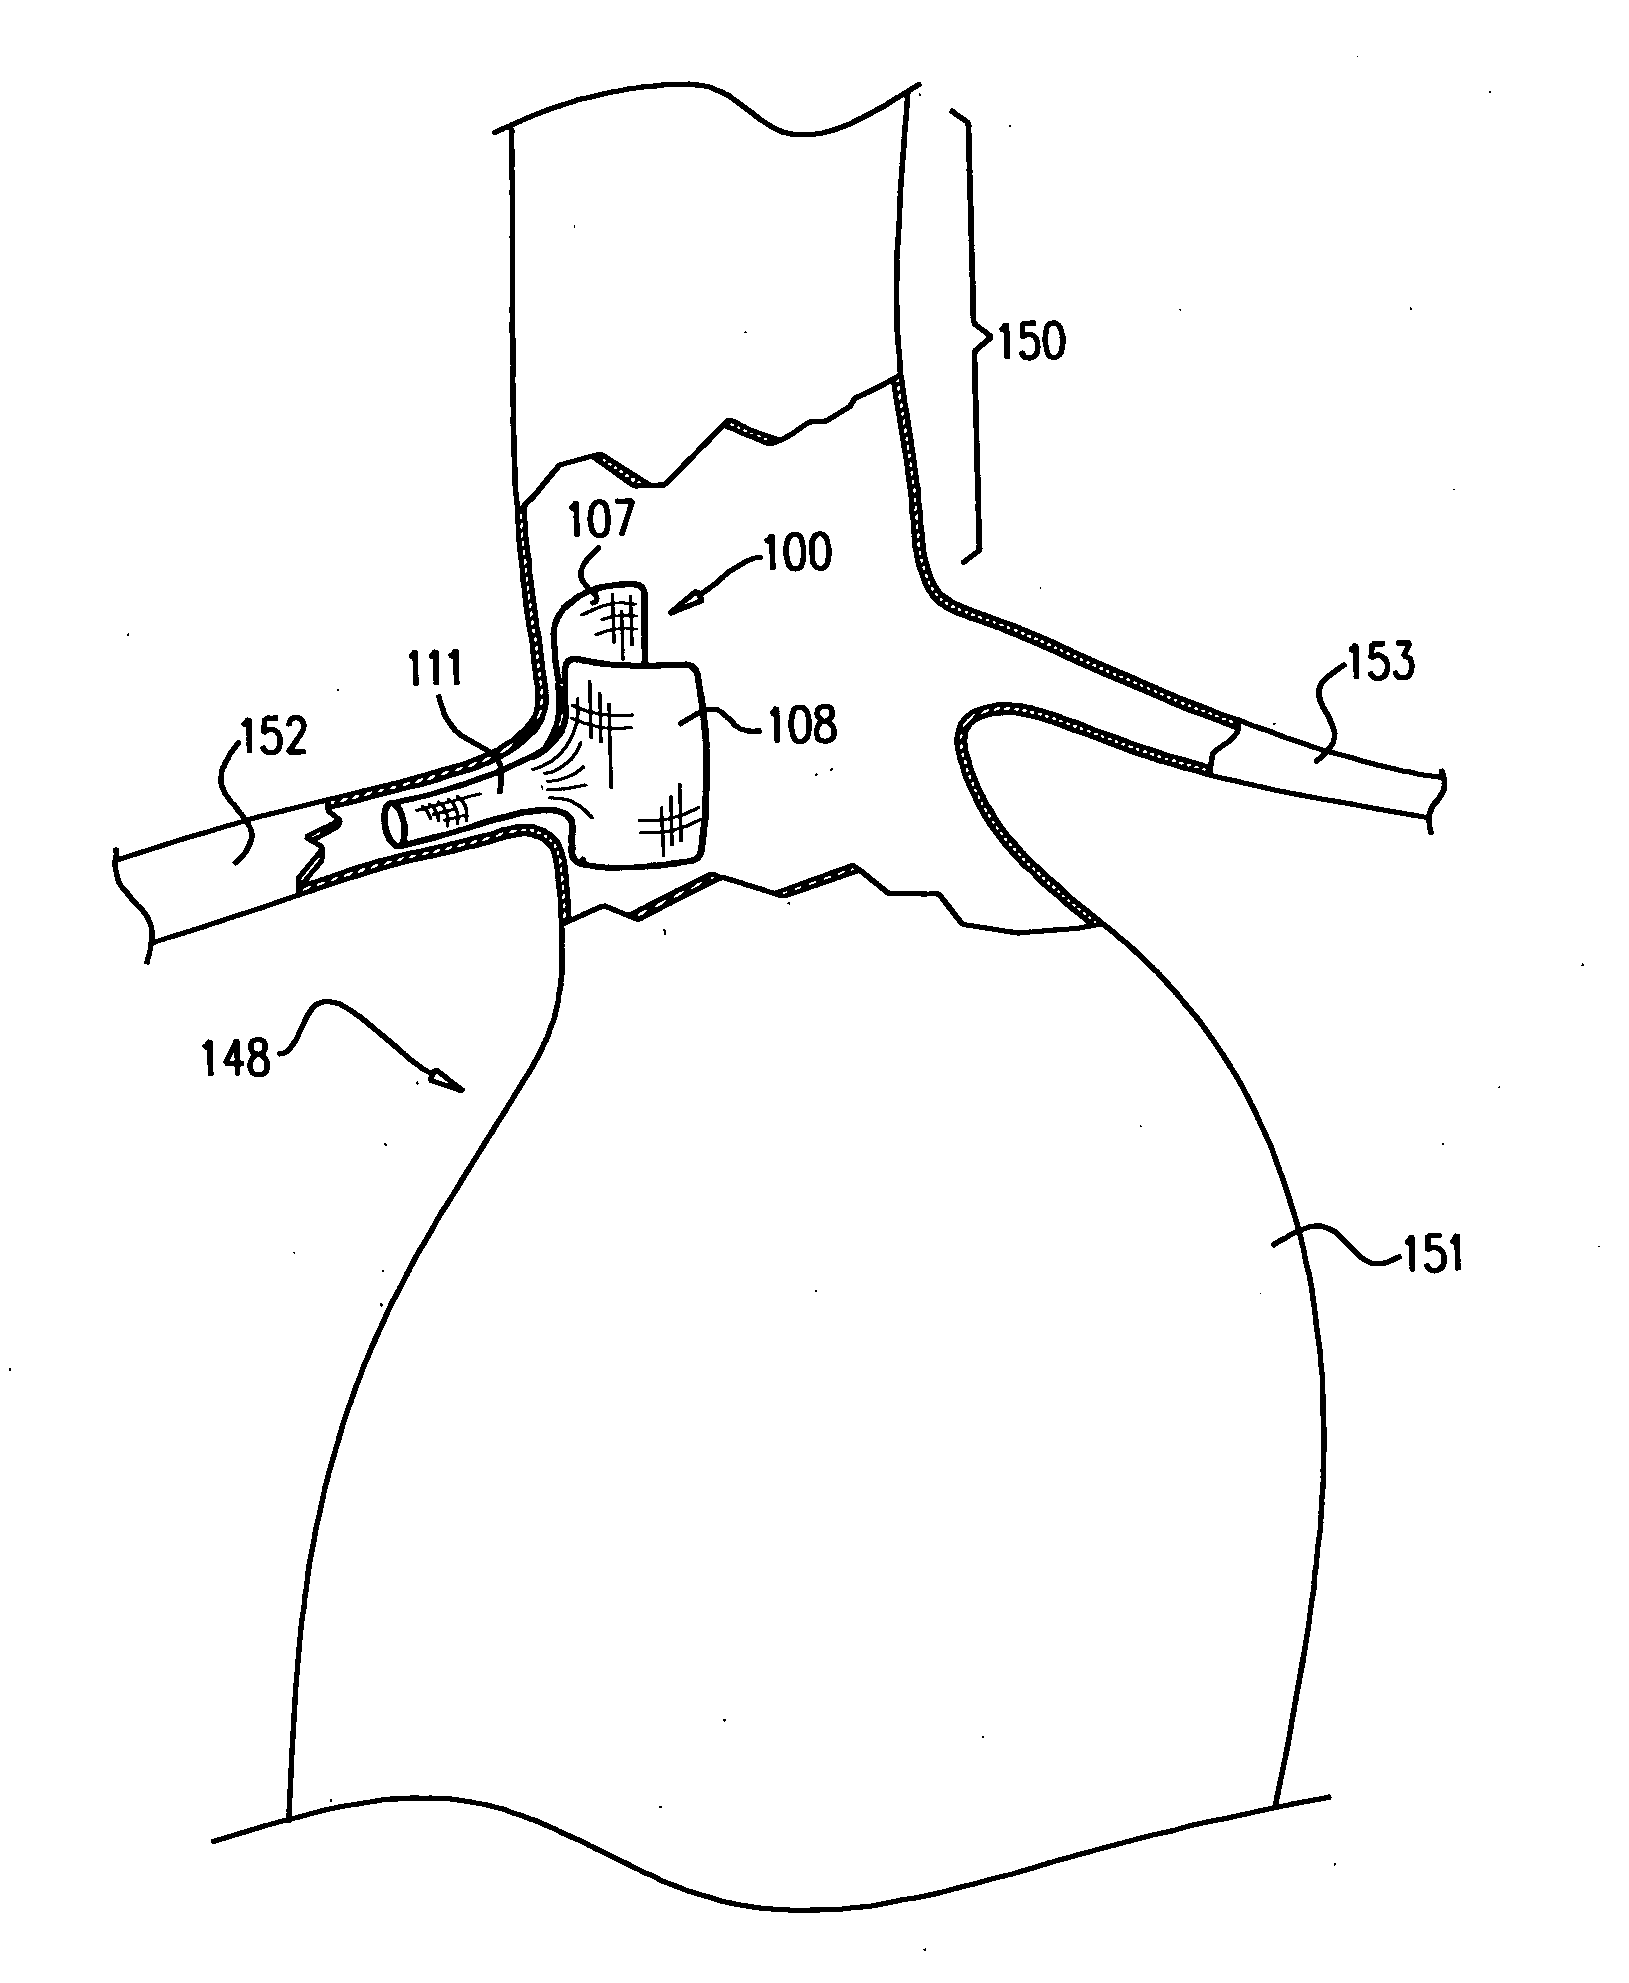 Treatment of a main body lumen in the vicinity of a branching body lumen